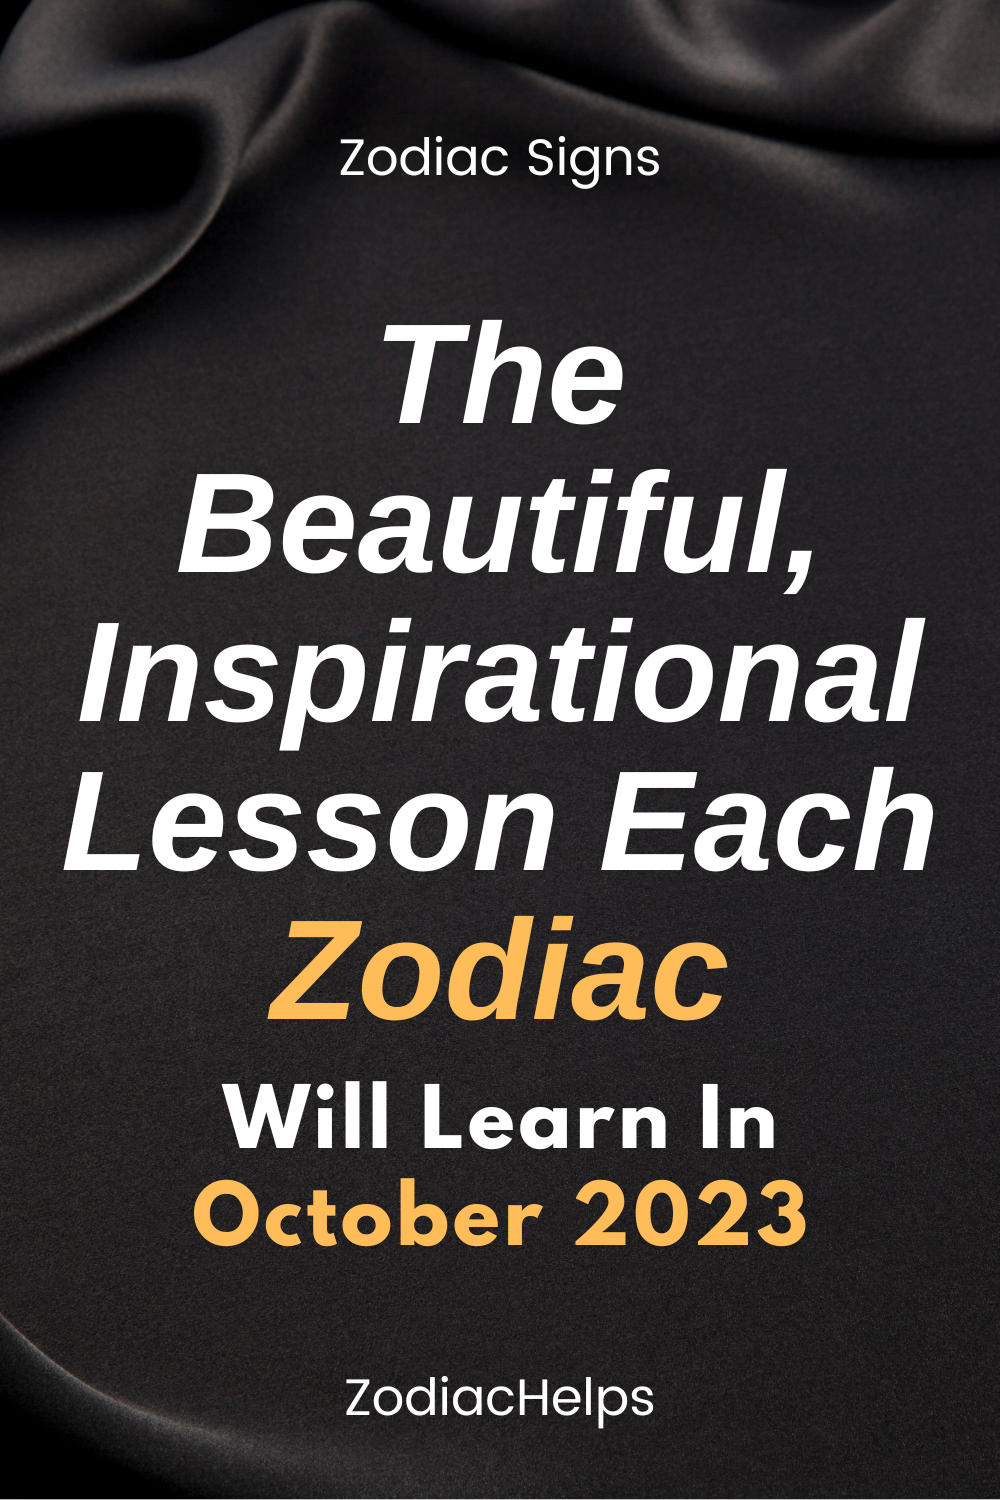 The Beautiful, Inspirational Lesson Each Zodiac Will Learn In October 2023